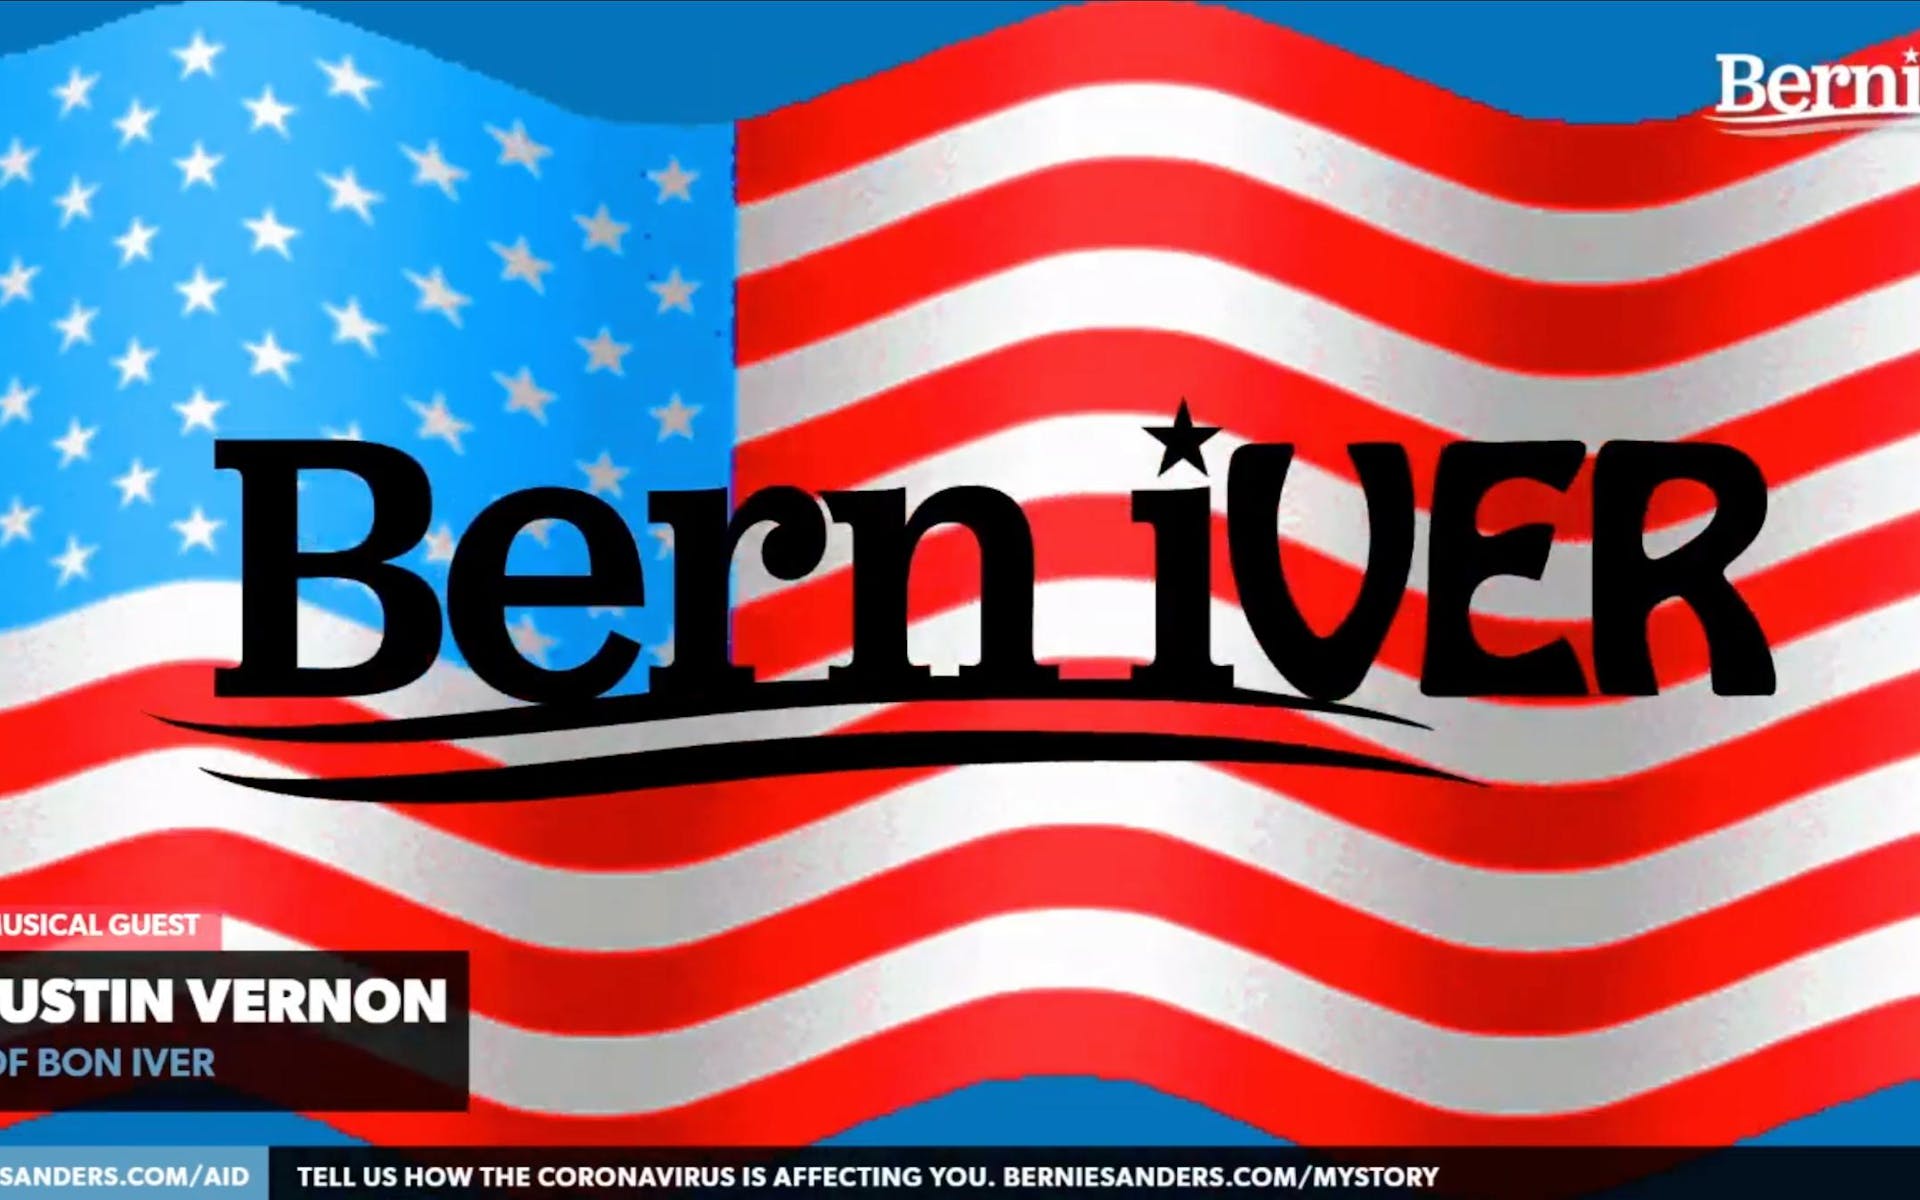 American flag with the words "Bern Iver" on top